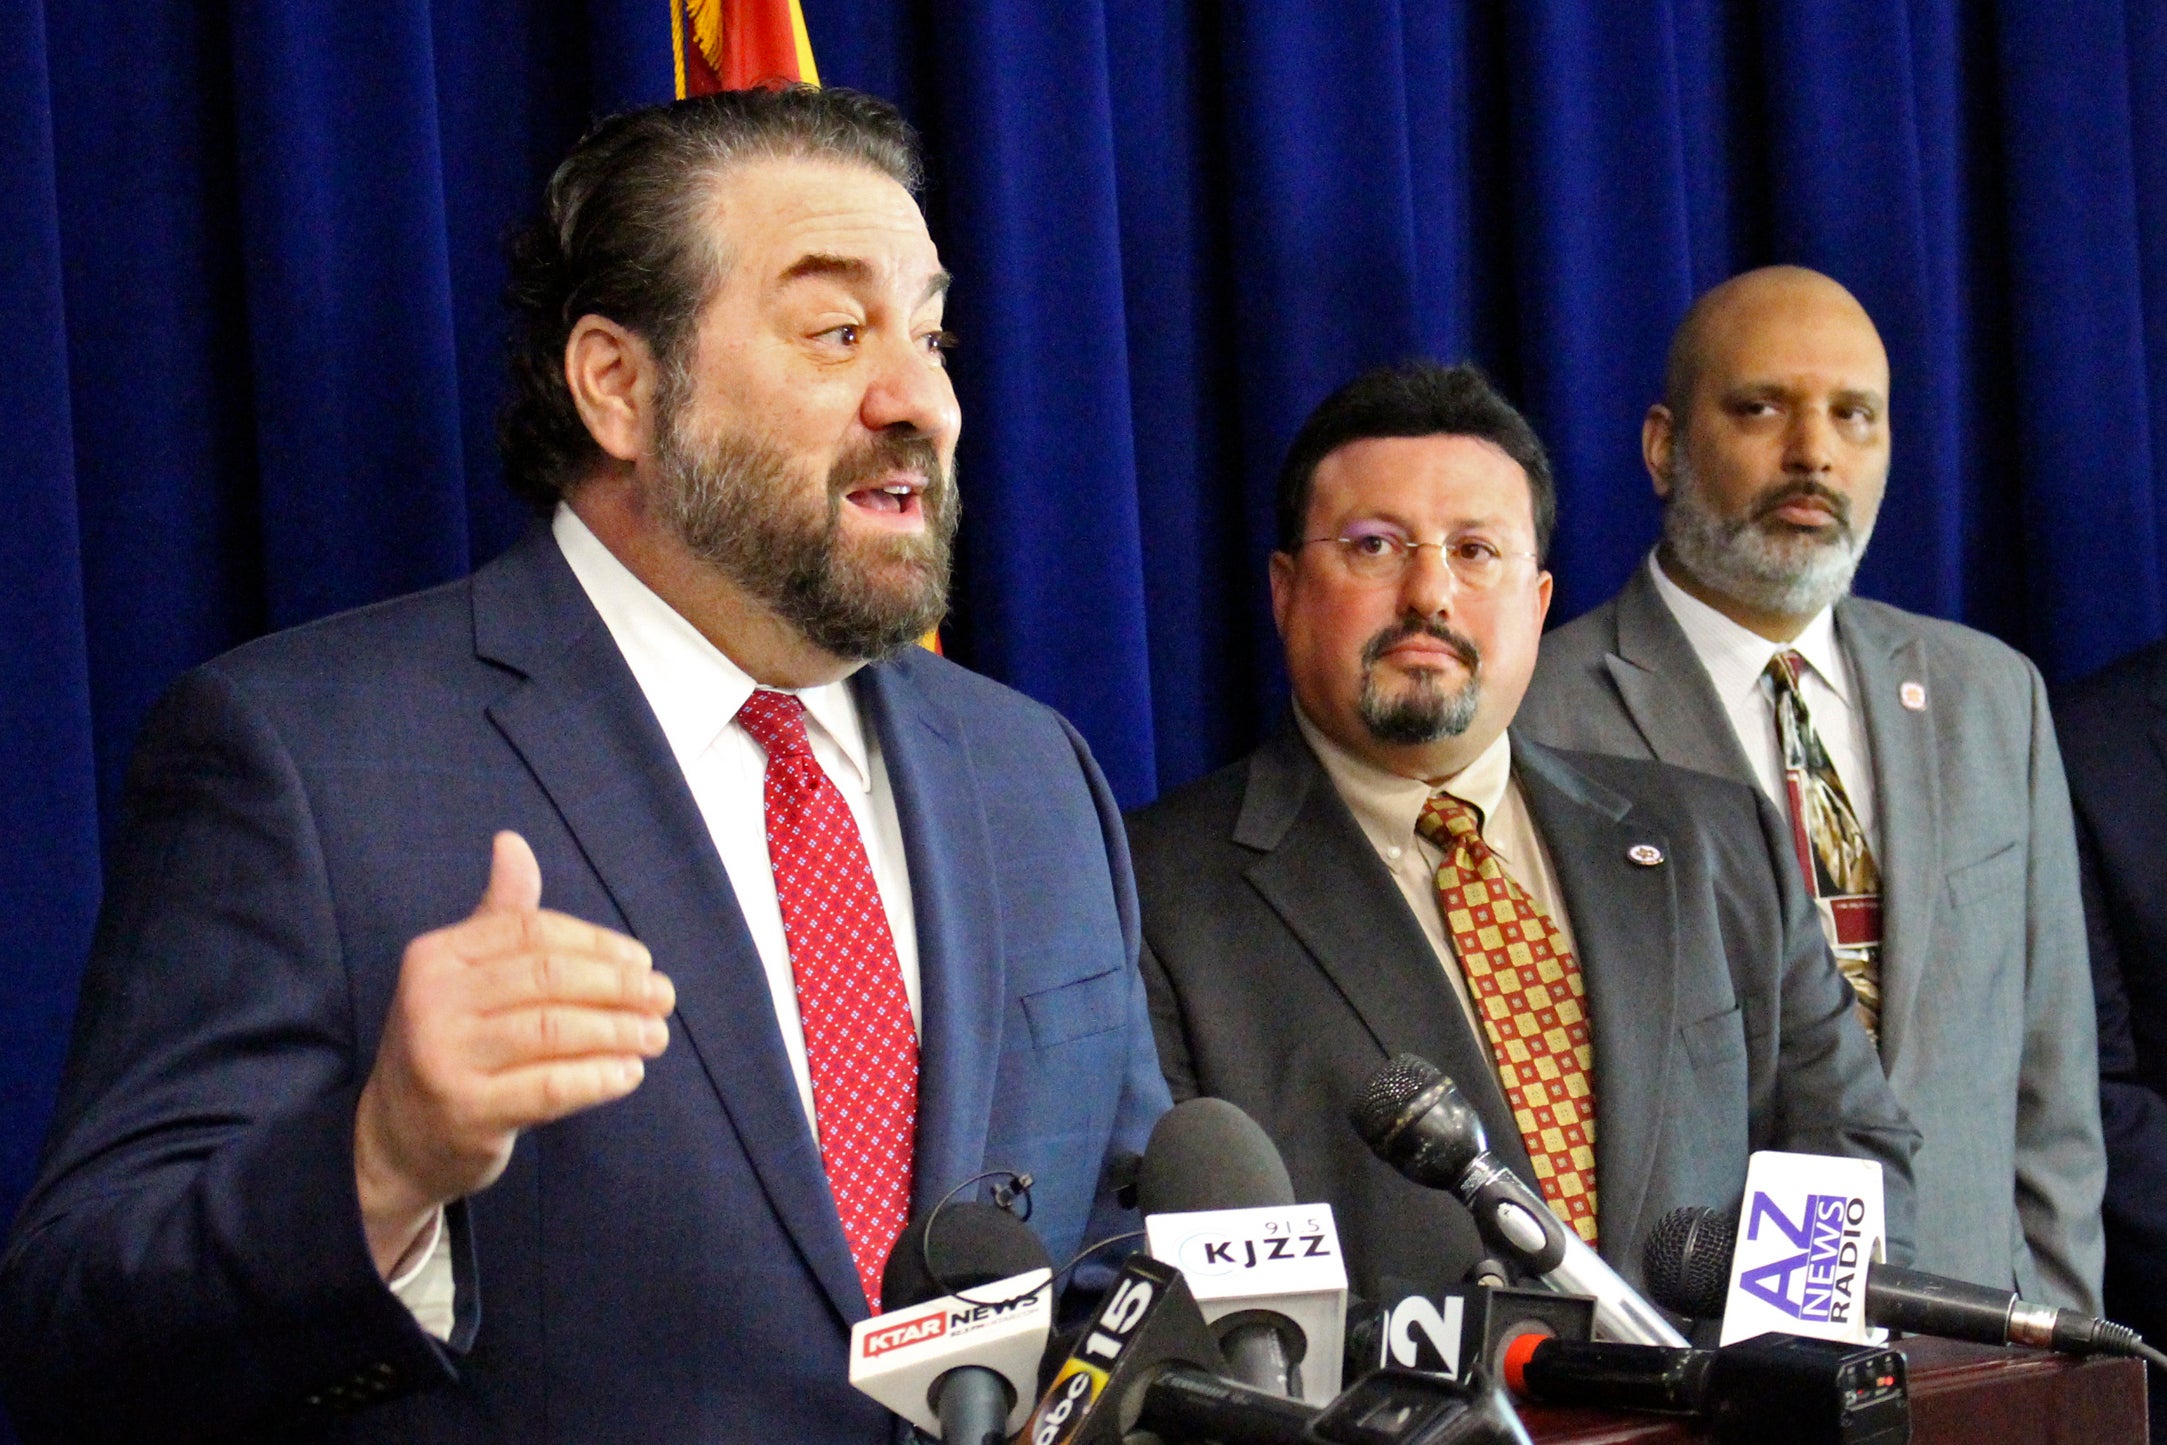 Arizona Attorney General Mark Brnovich speaks at a news conference in Phoenix on Jan. 7, 2020.